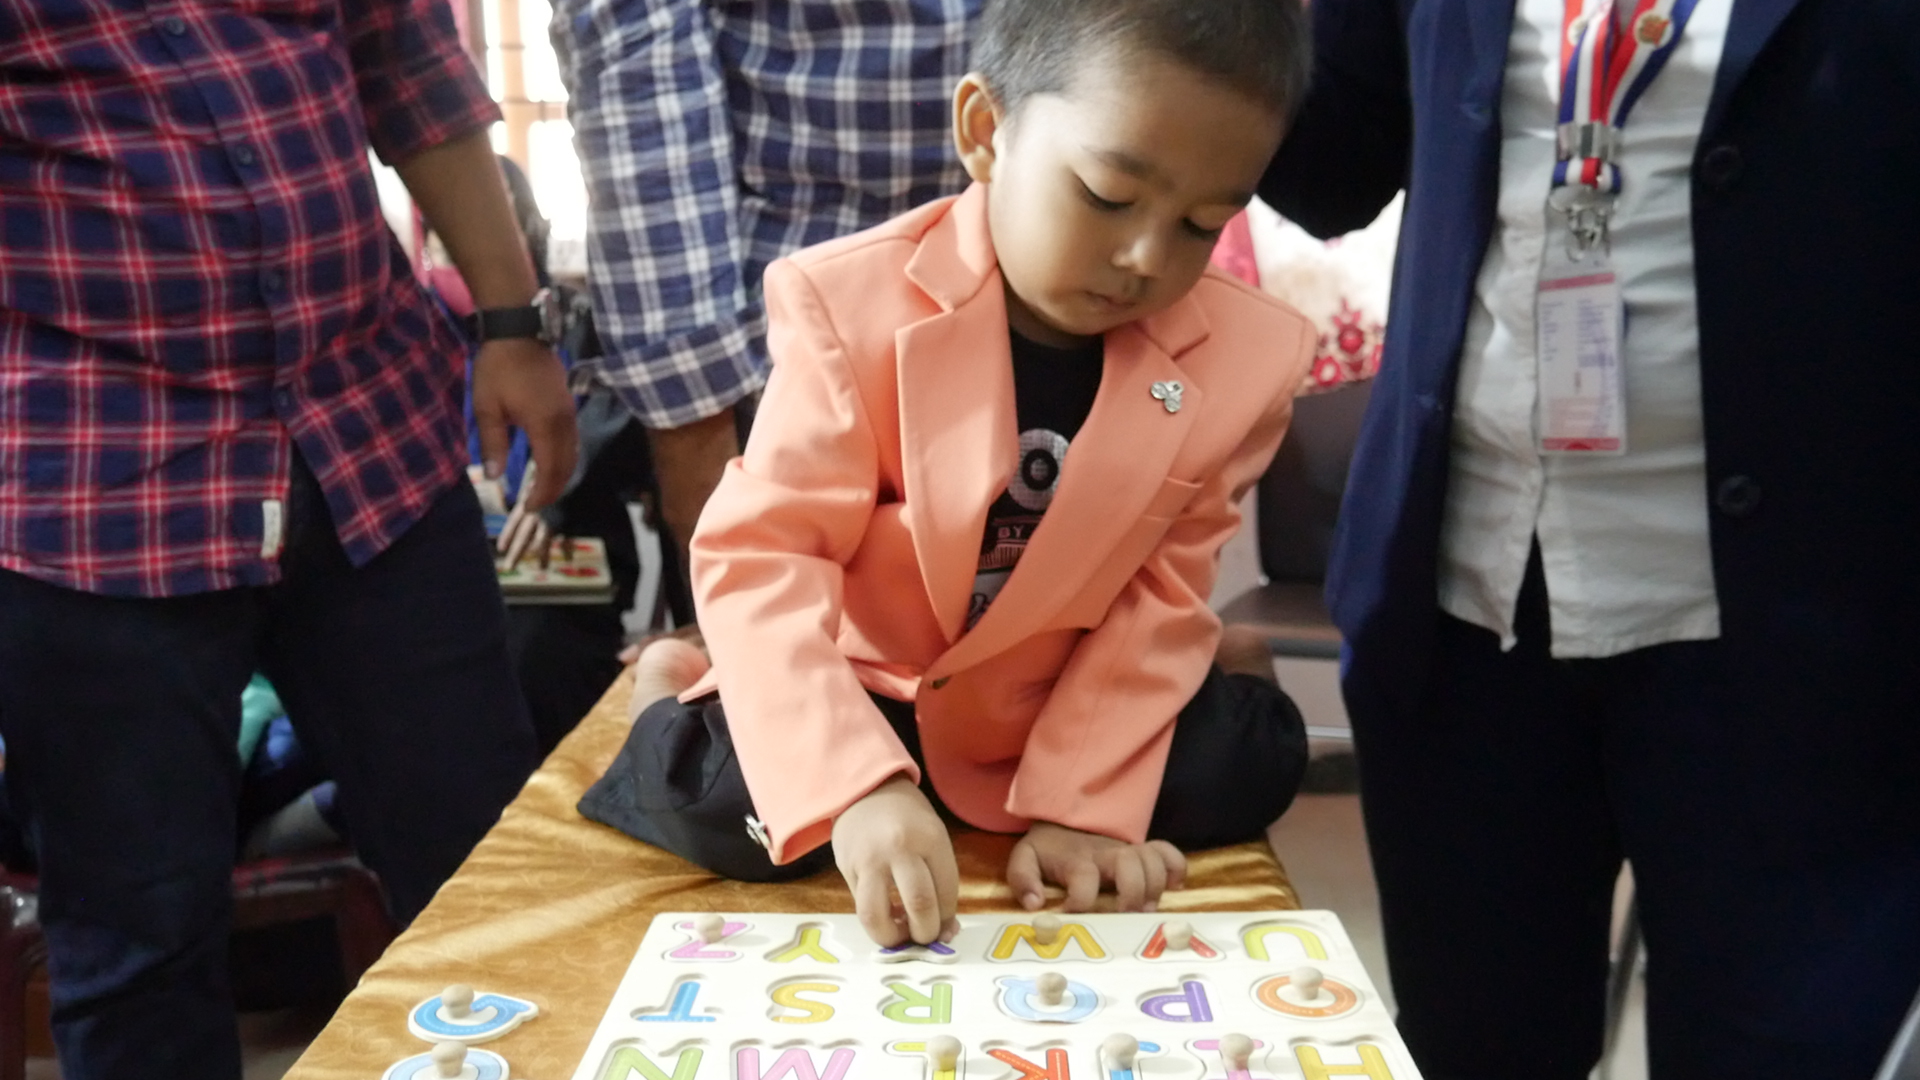 World's youngest kid to solved the jigsaw puzzles